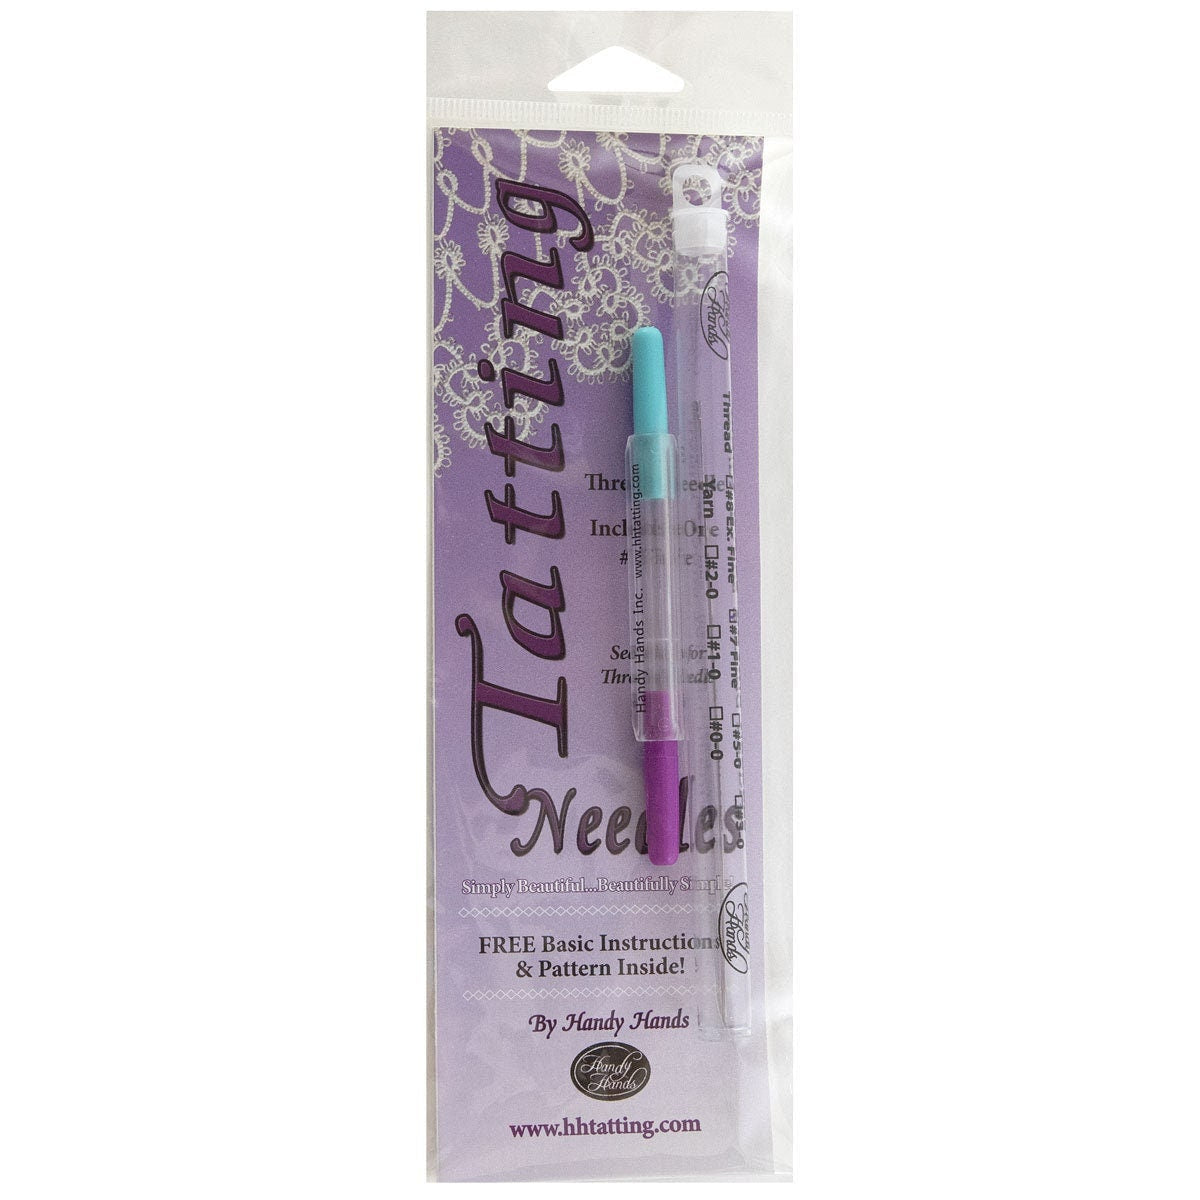 Tatting Needle size 7 in a tube with a needle threader from Handy Hands. Perfect for size 20 tatting thread.